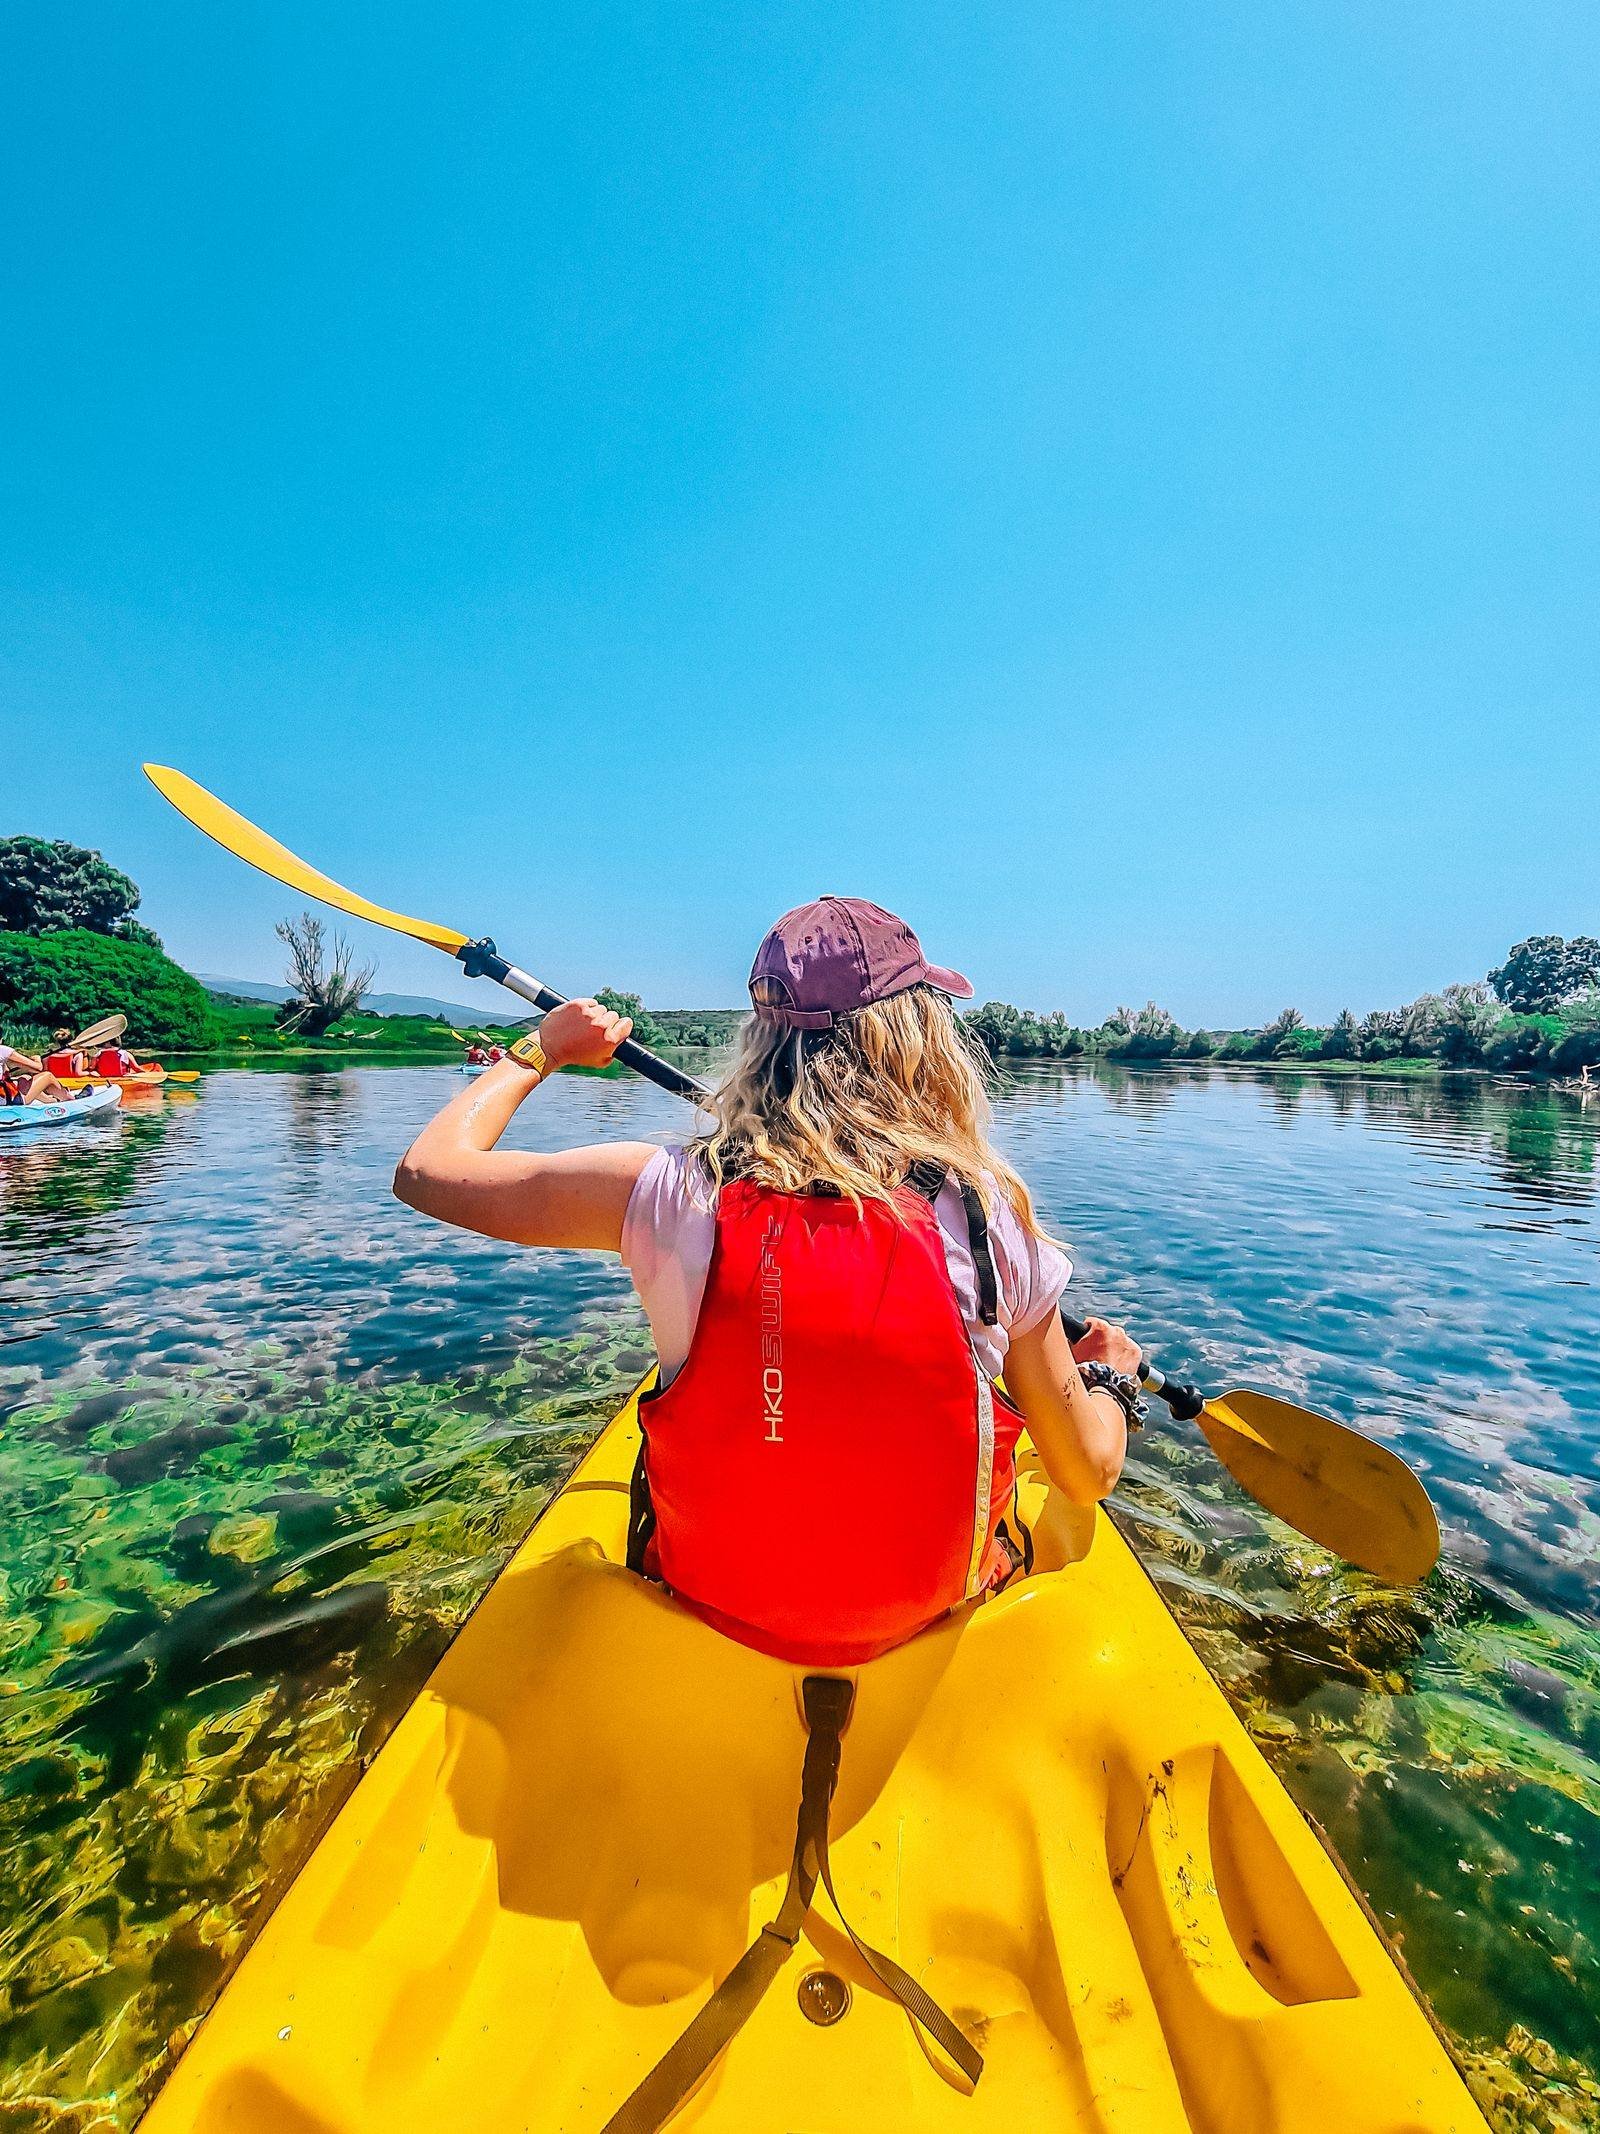 A girl in red life jacket paddling a yellow canoe in clear green water